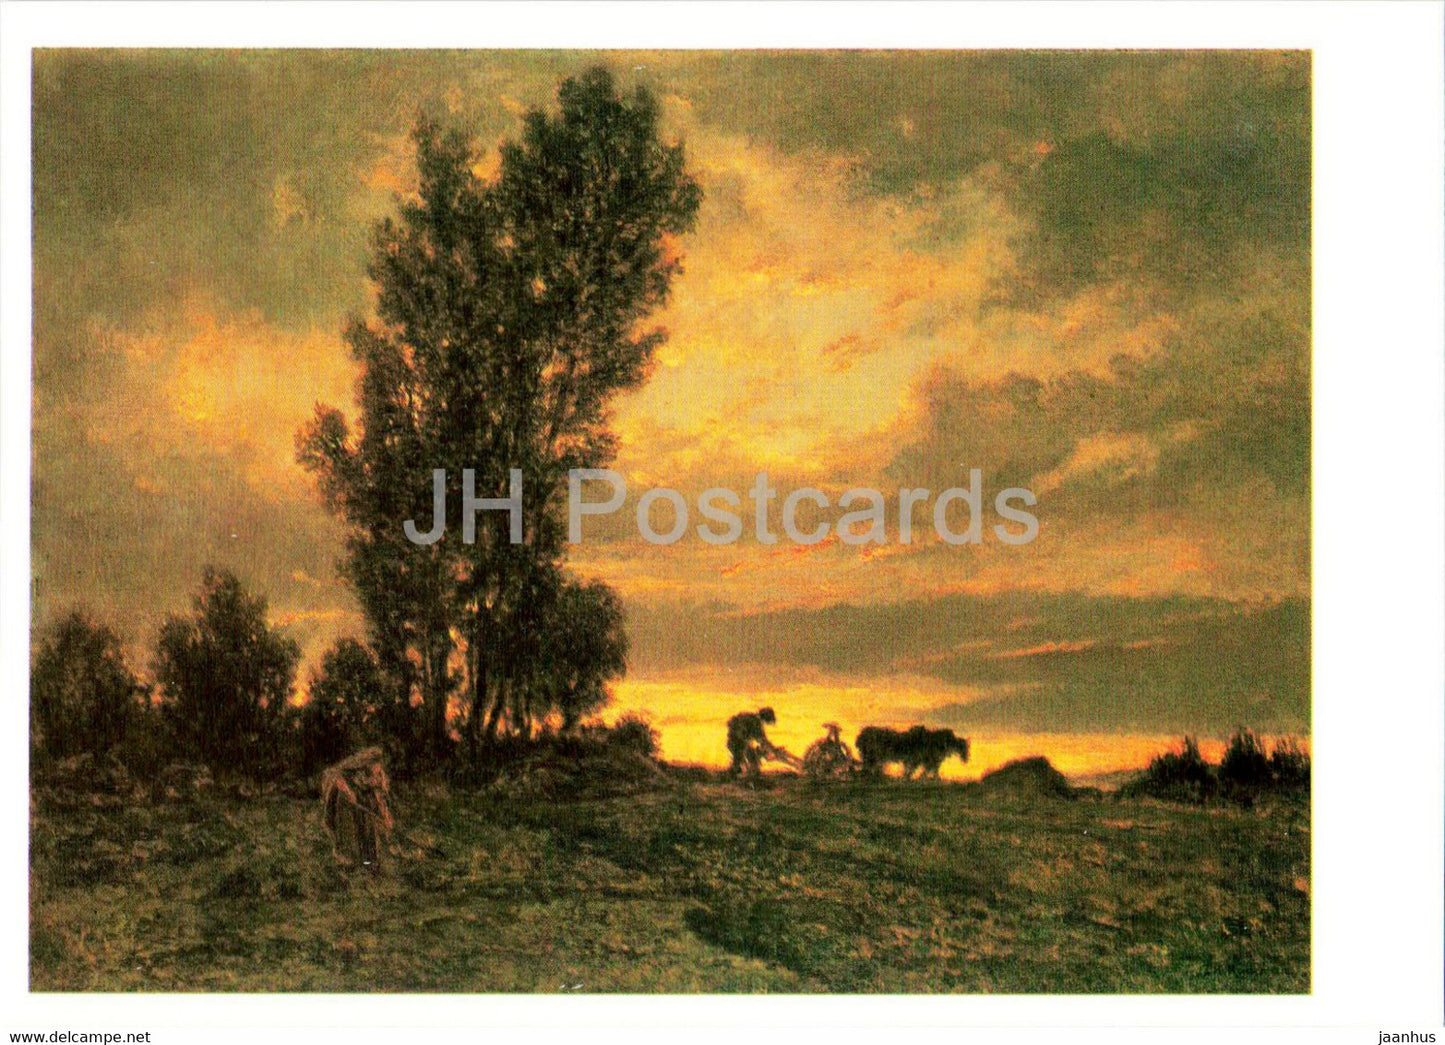 painting by Theodore Rousseau - Landscape with Plowman - French art - 1983 - Russia USSR - unused - JH Postcards